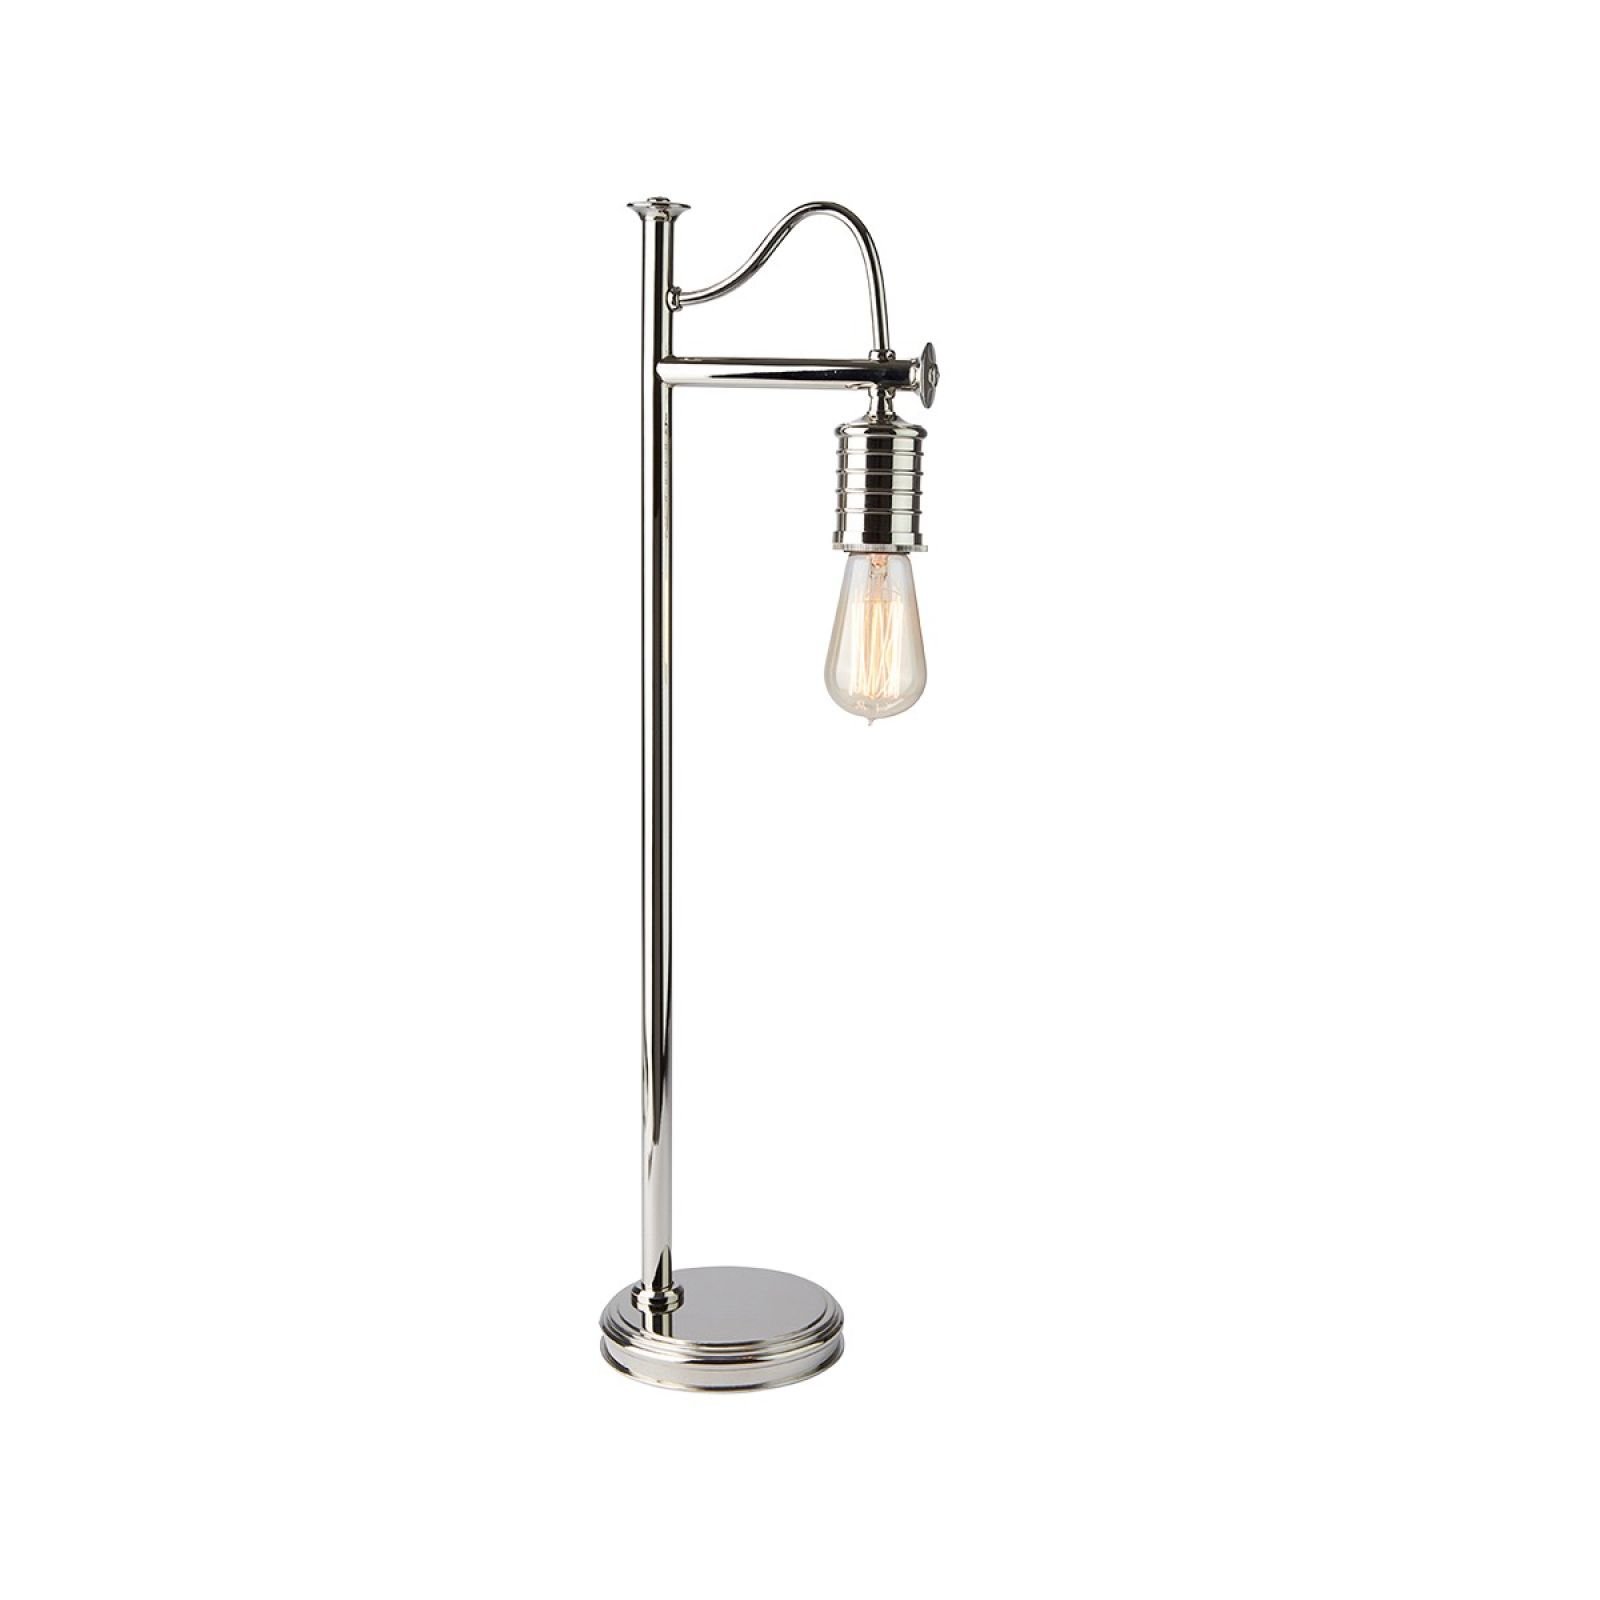 Douillet table lamp in Polished Nickel